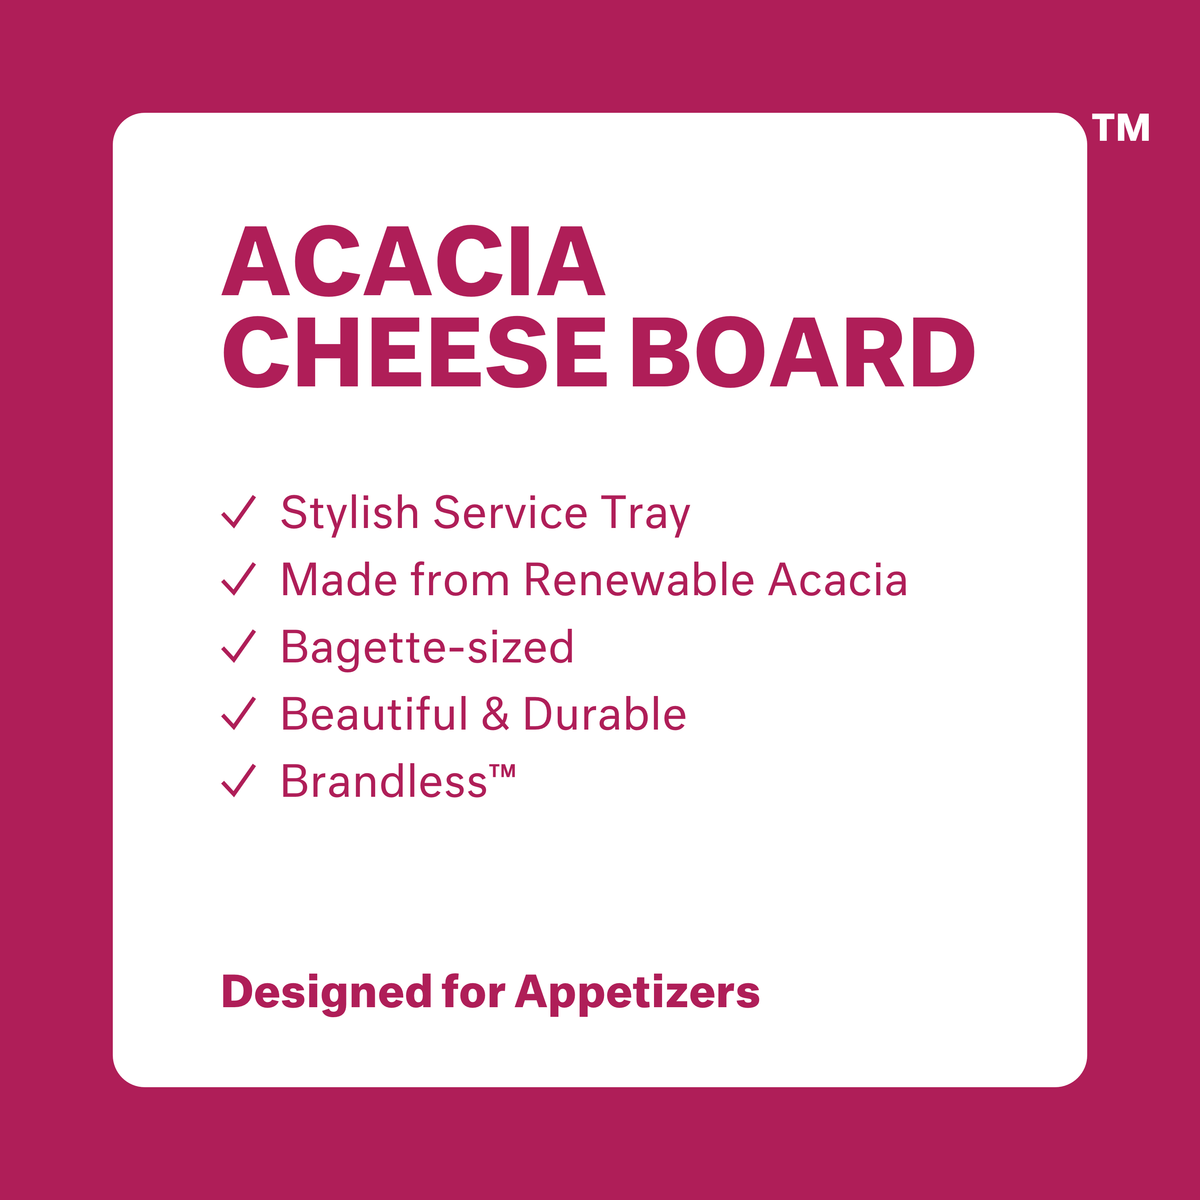 Acacia Cheese Board: stylish service tray, made from renewable acacia, bagette-sized, beautiful &amp; durable, Brandless.  Designed for appetizers.